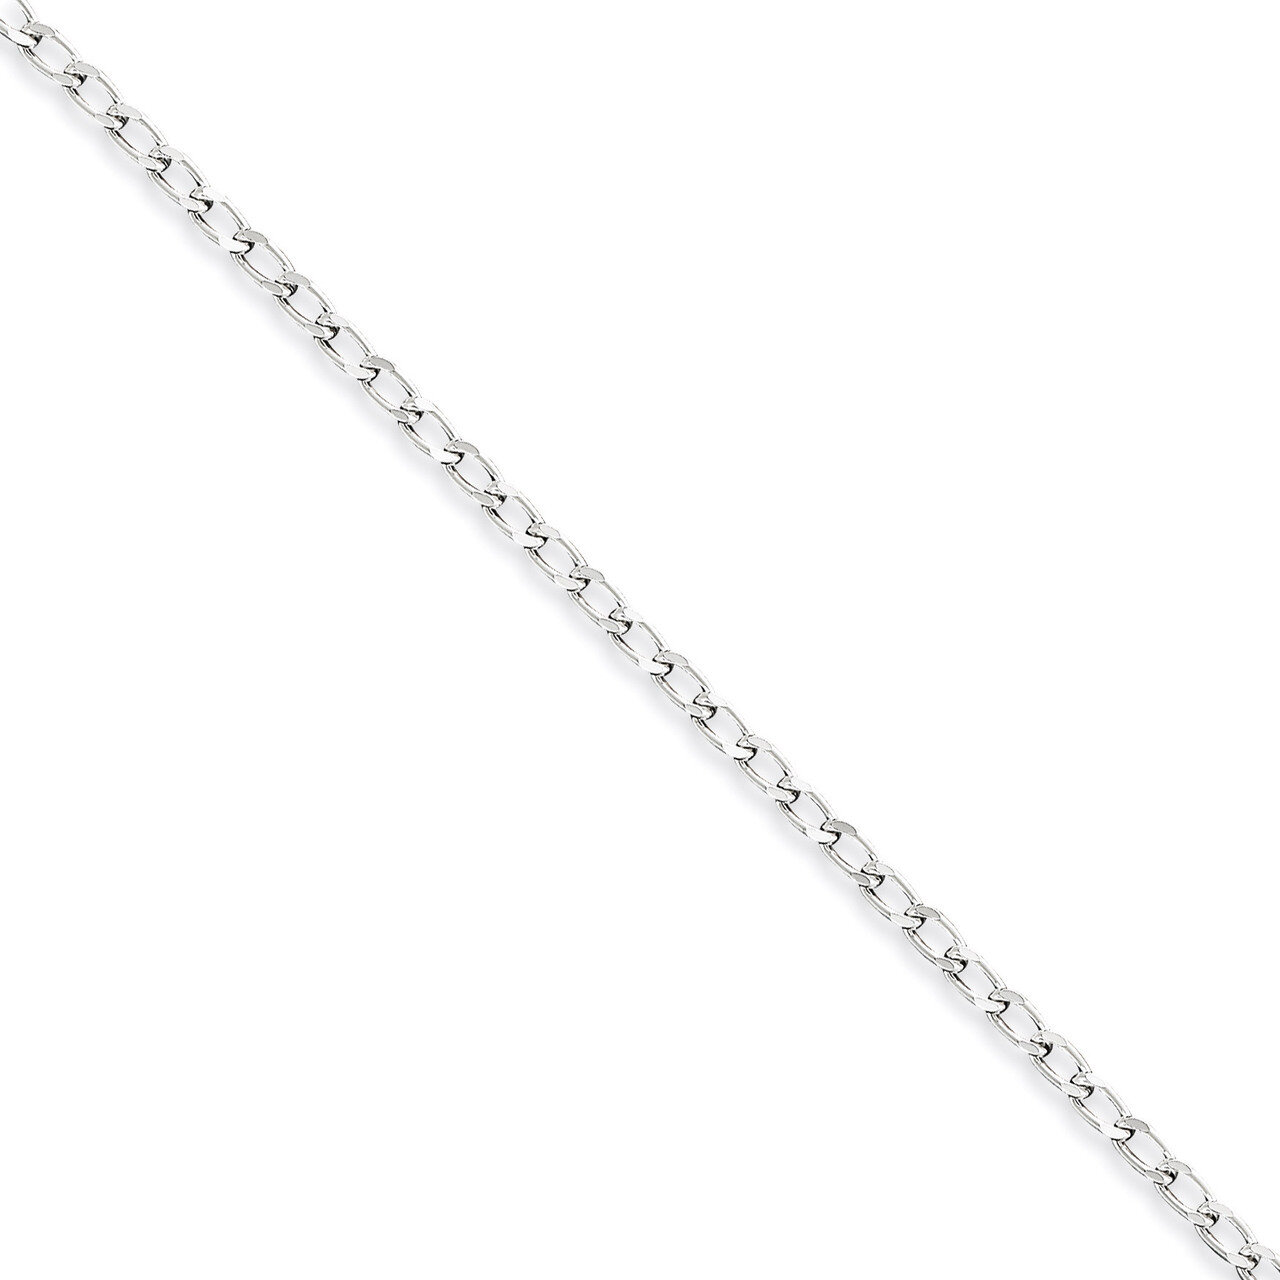 8 Inch 2.8mm Open Link Chain Sterling Silver QLL080-8